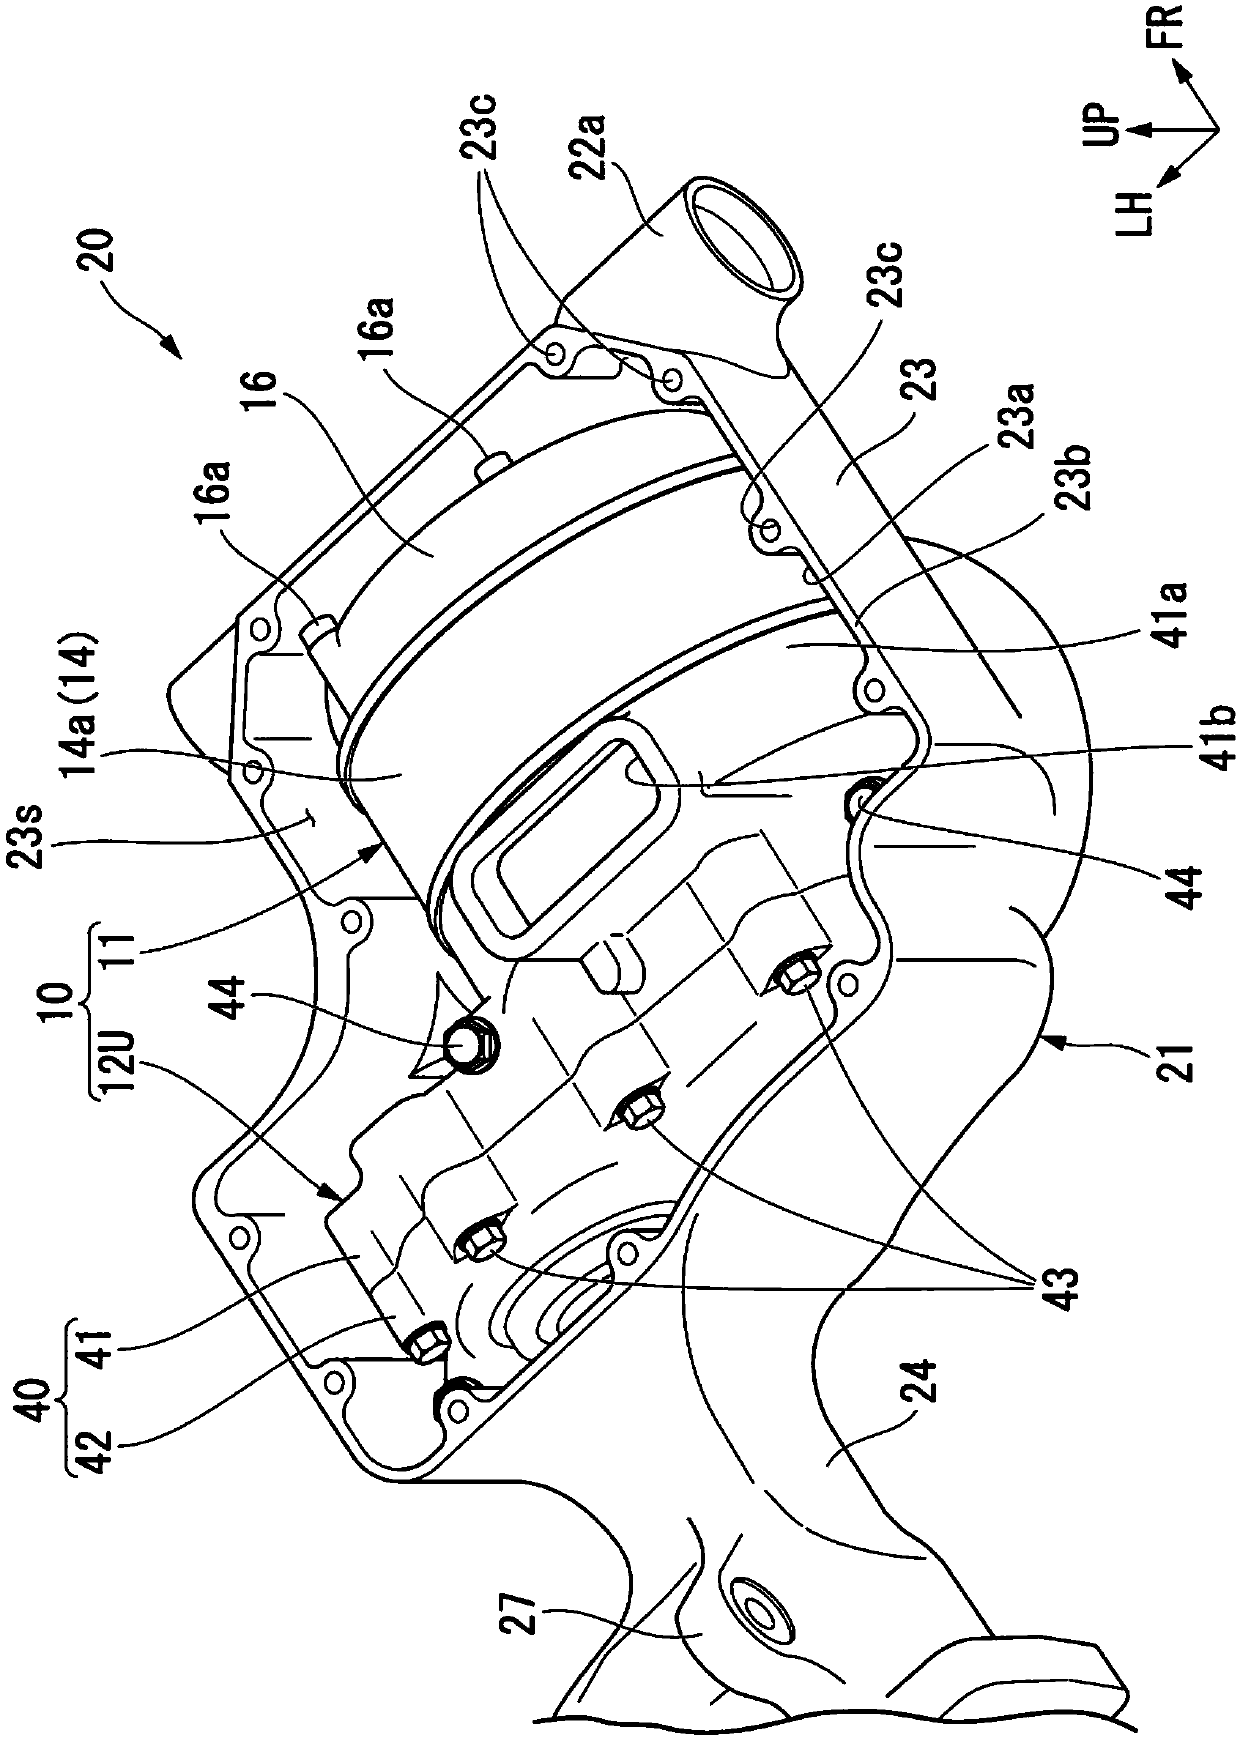 Swing arm structure for saddle riding electric vehicle